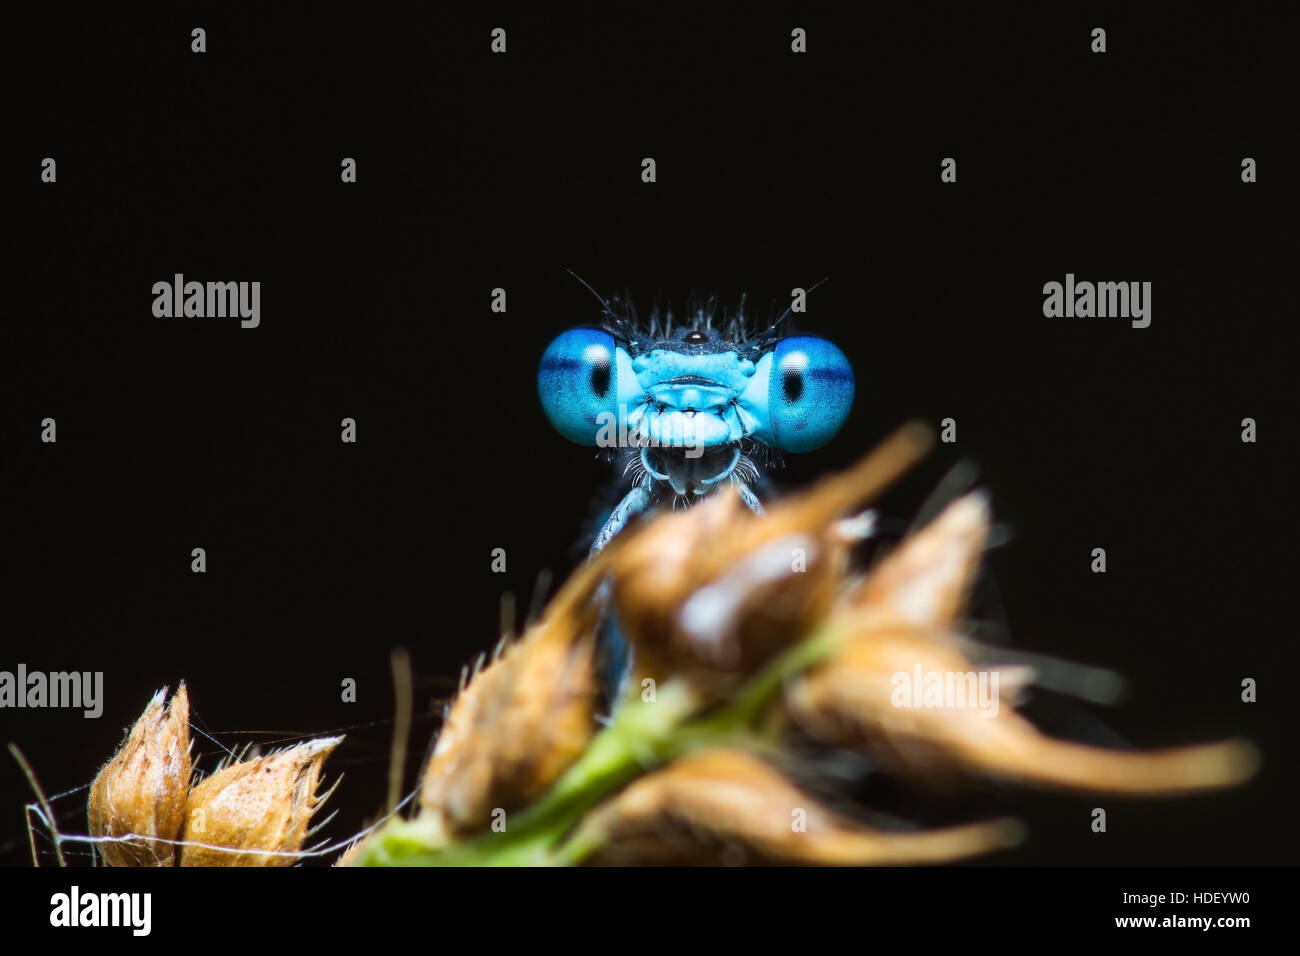 Funny Surprised Blue Dragonfly Portrait on Dark Background Stock Photo